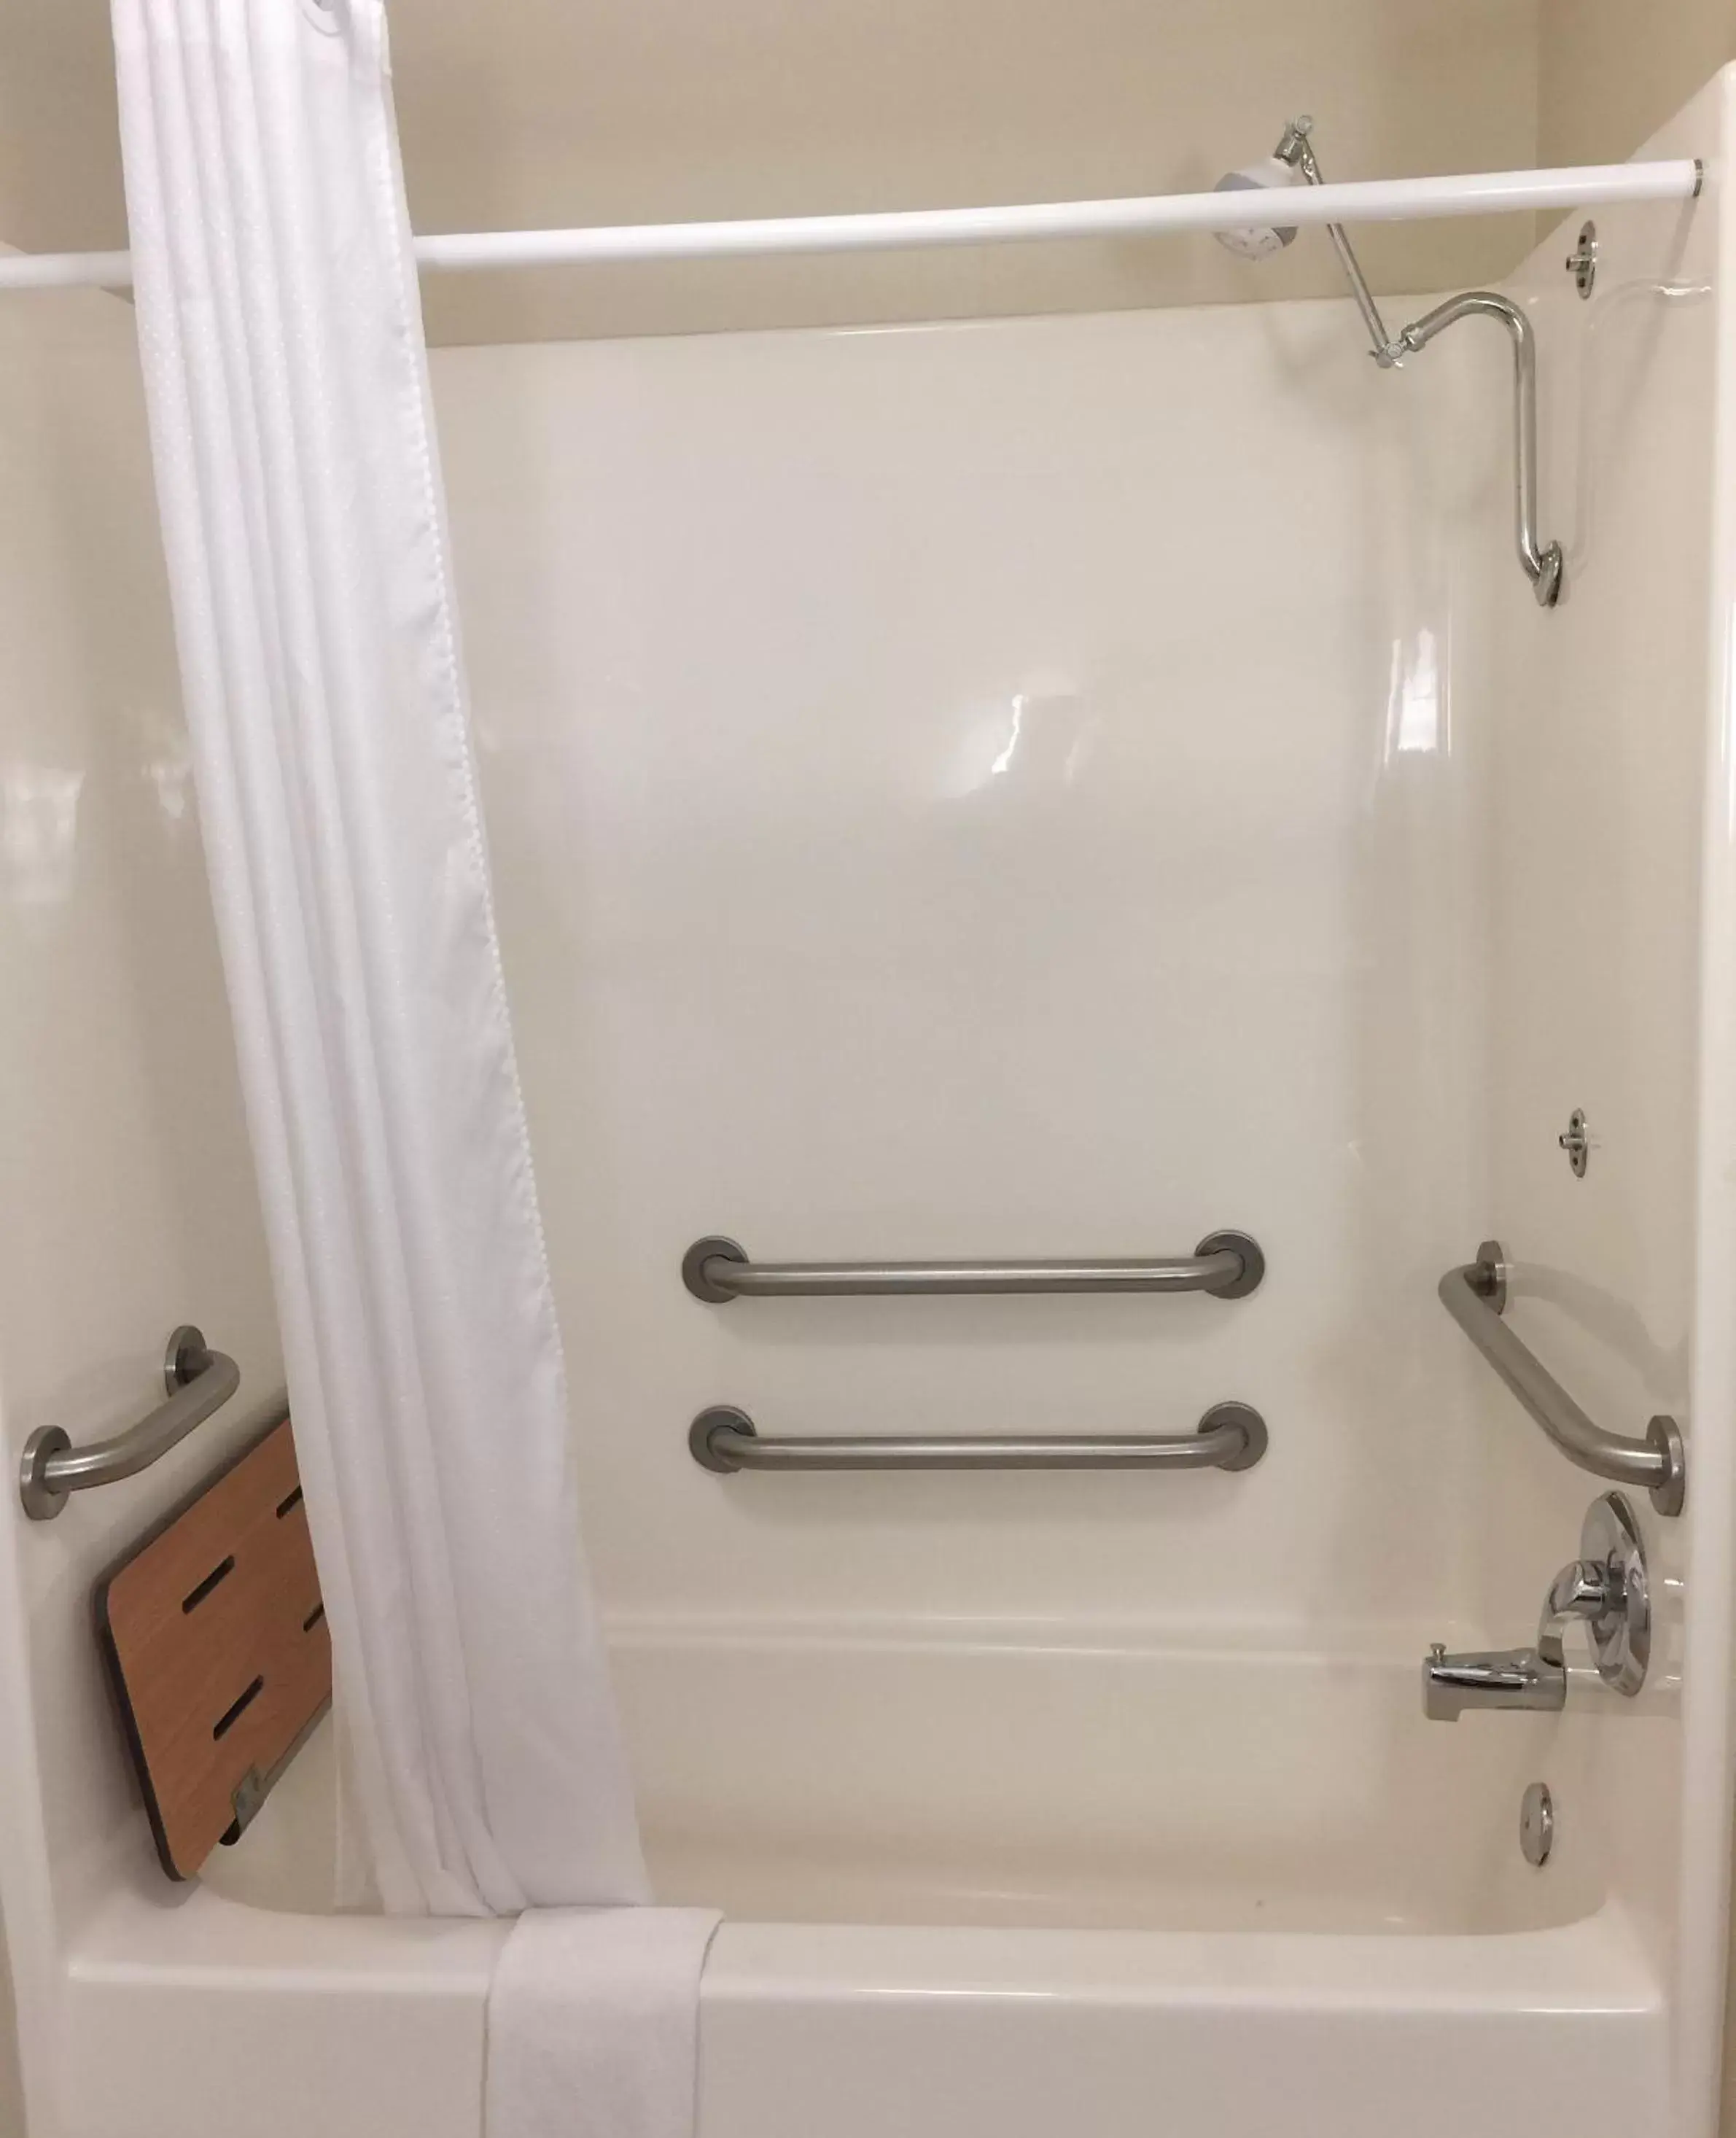 Area and facilities, Bathroom in Country Inn & Suites by Radisson, Bel Air/Aberdeen, MD